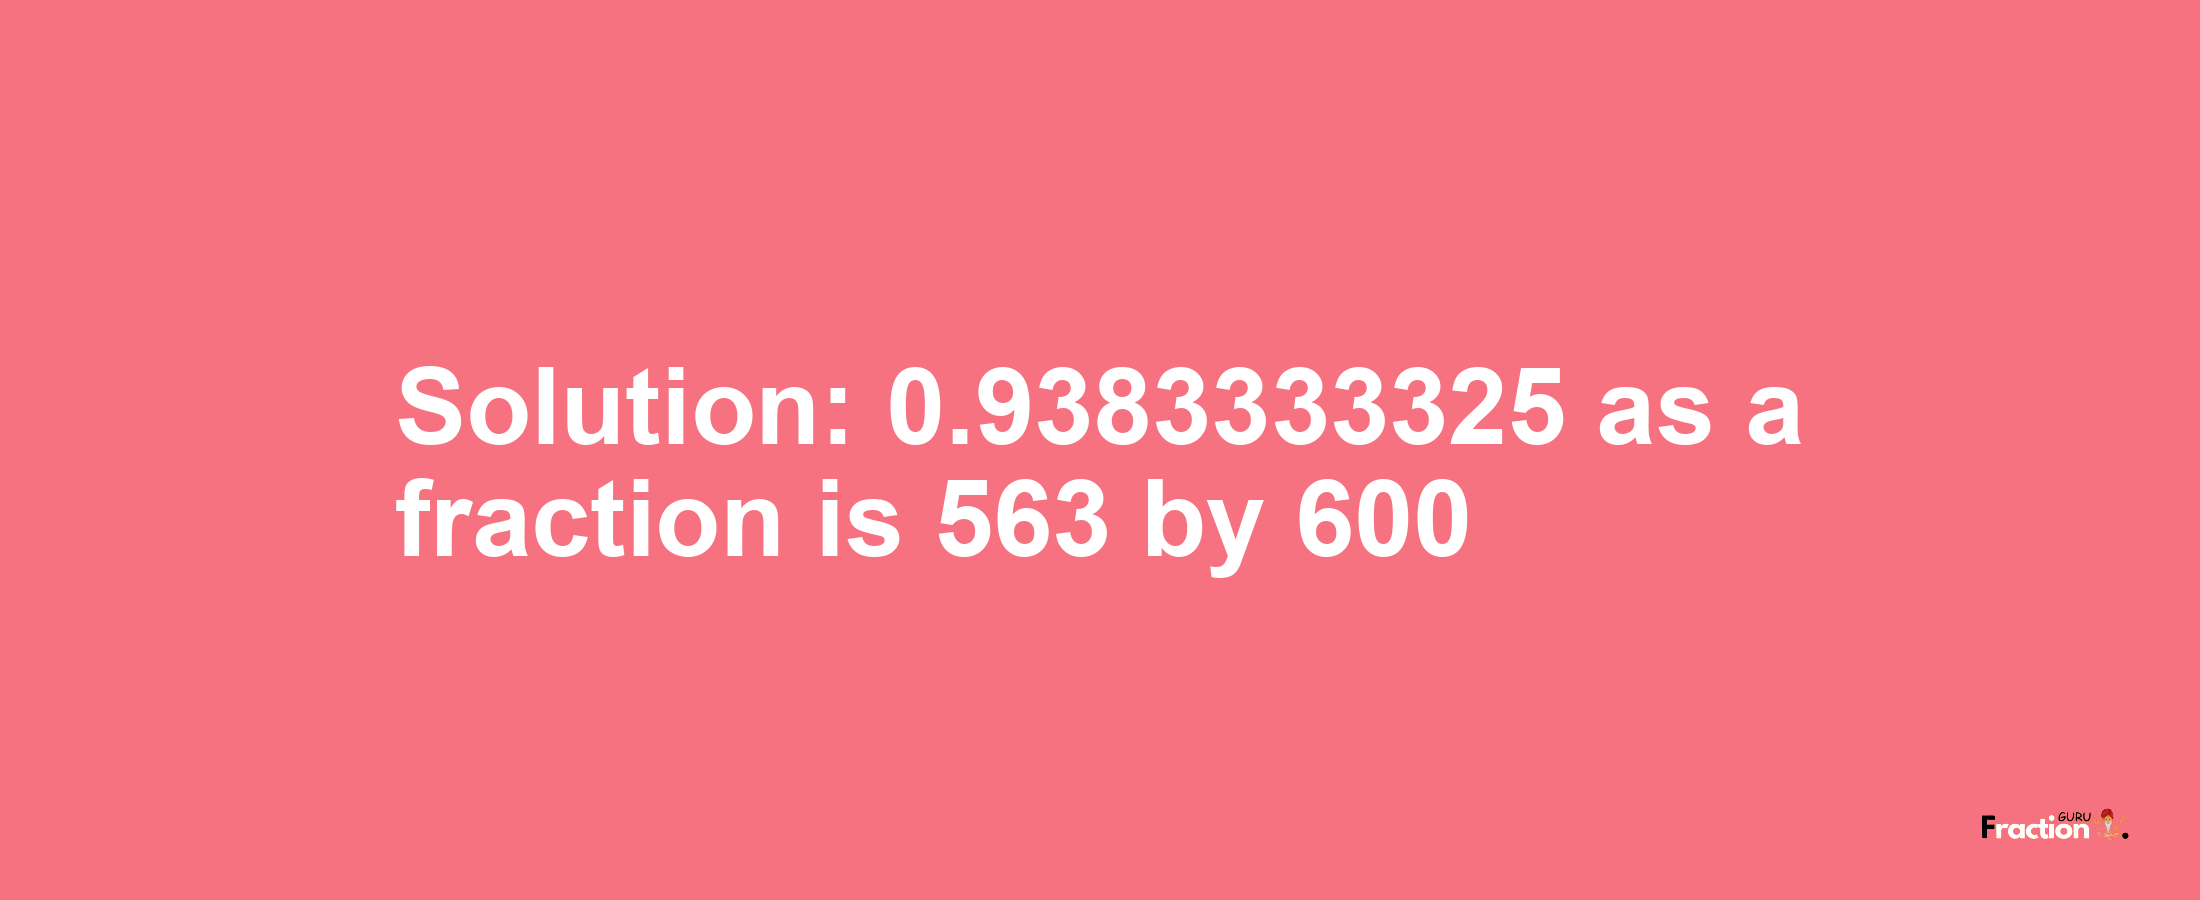 Solution:0.9383333325 as a fraction is 563/600